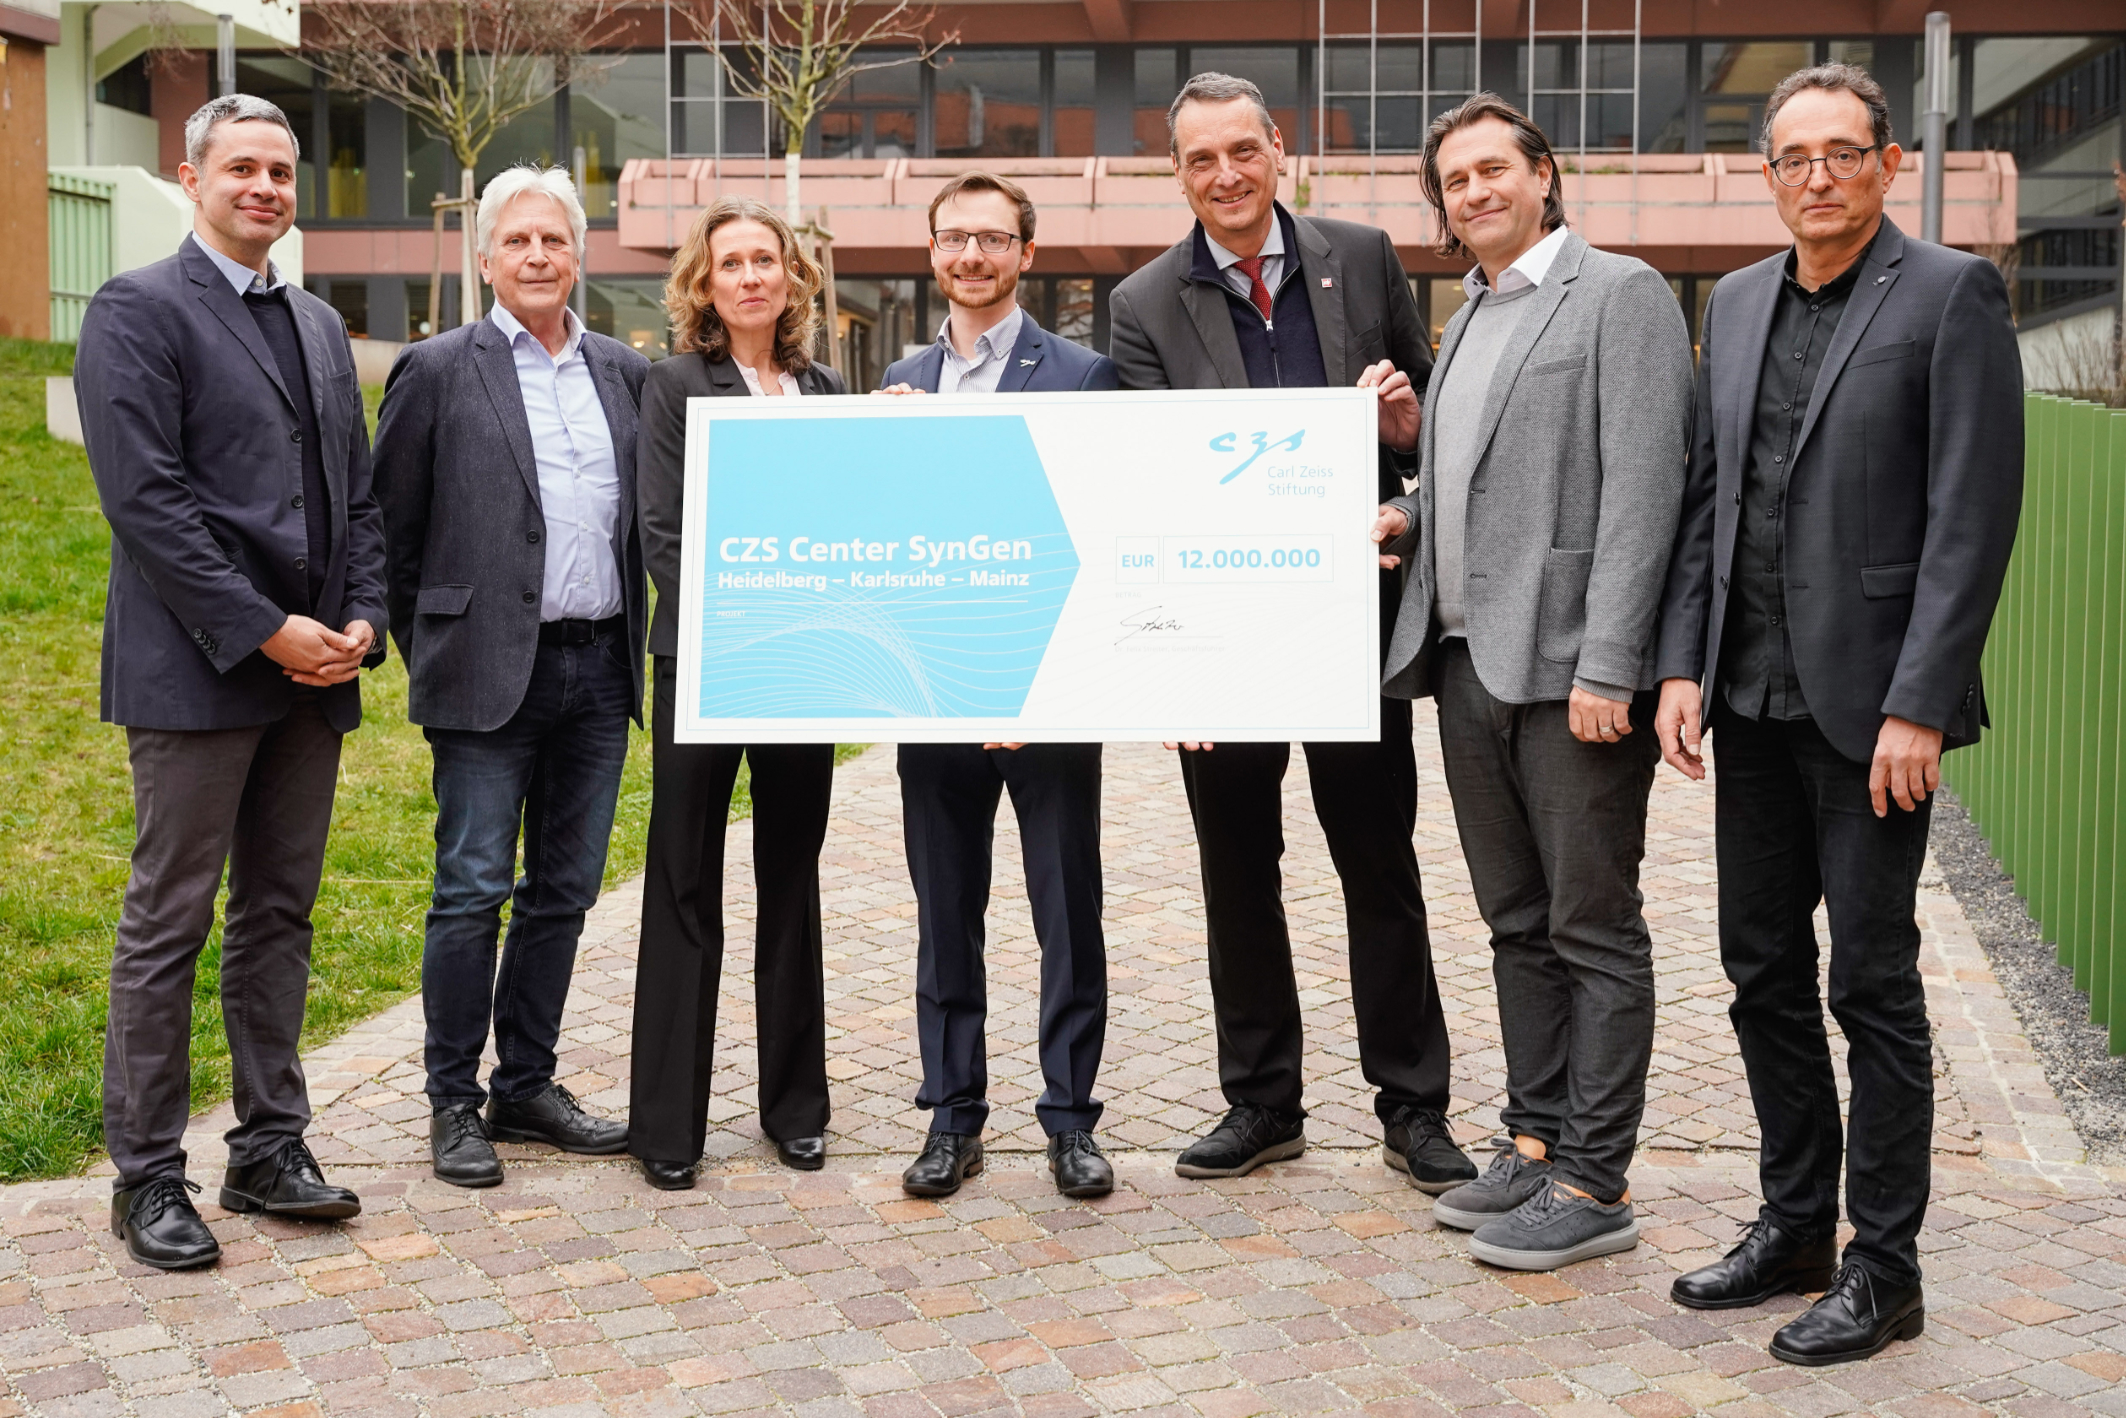 Gathered for the opening at Heidelberg University: the scientific management committee of the CZS Center SynGen, represented by Michael Knop (right), Sylvia Erhardt (third from left) and Edward Lemke (left), as well as Phil-Alan Gärtig as representative of the Carl-Zeiss-Stiftung (centre) and Andreas Dreuw (second from right), Stefan Müller-Stach (third from right) and Martin Bastmeyer (second from left) as representatives of the participating universities.